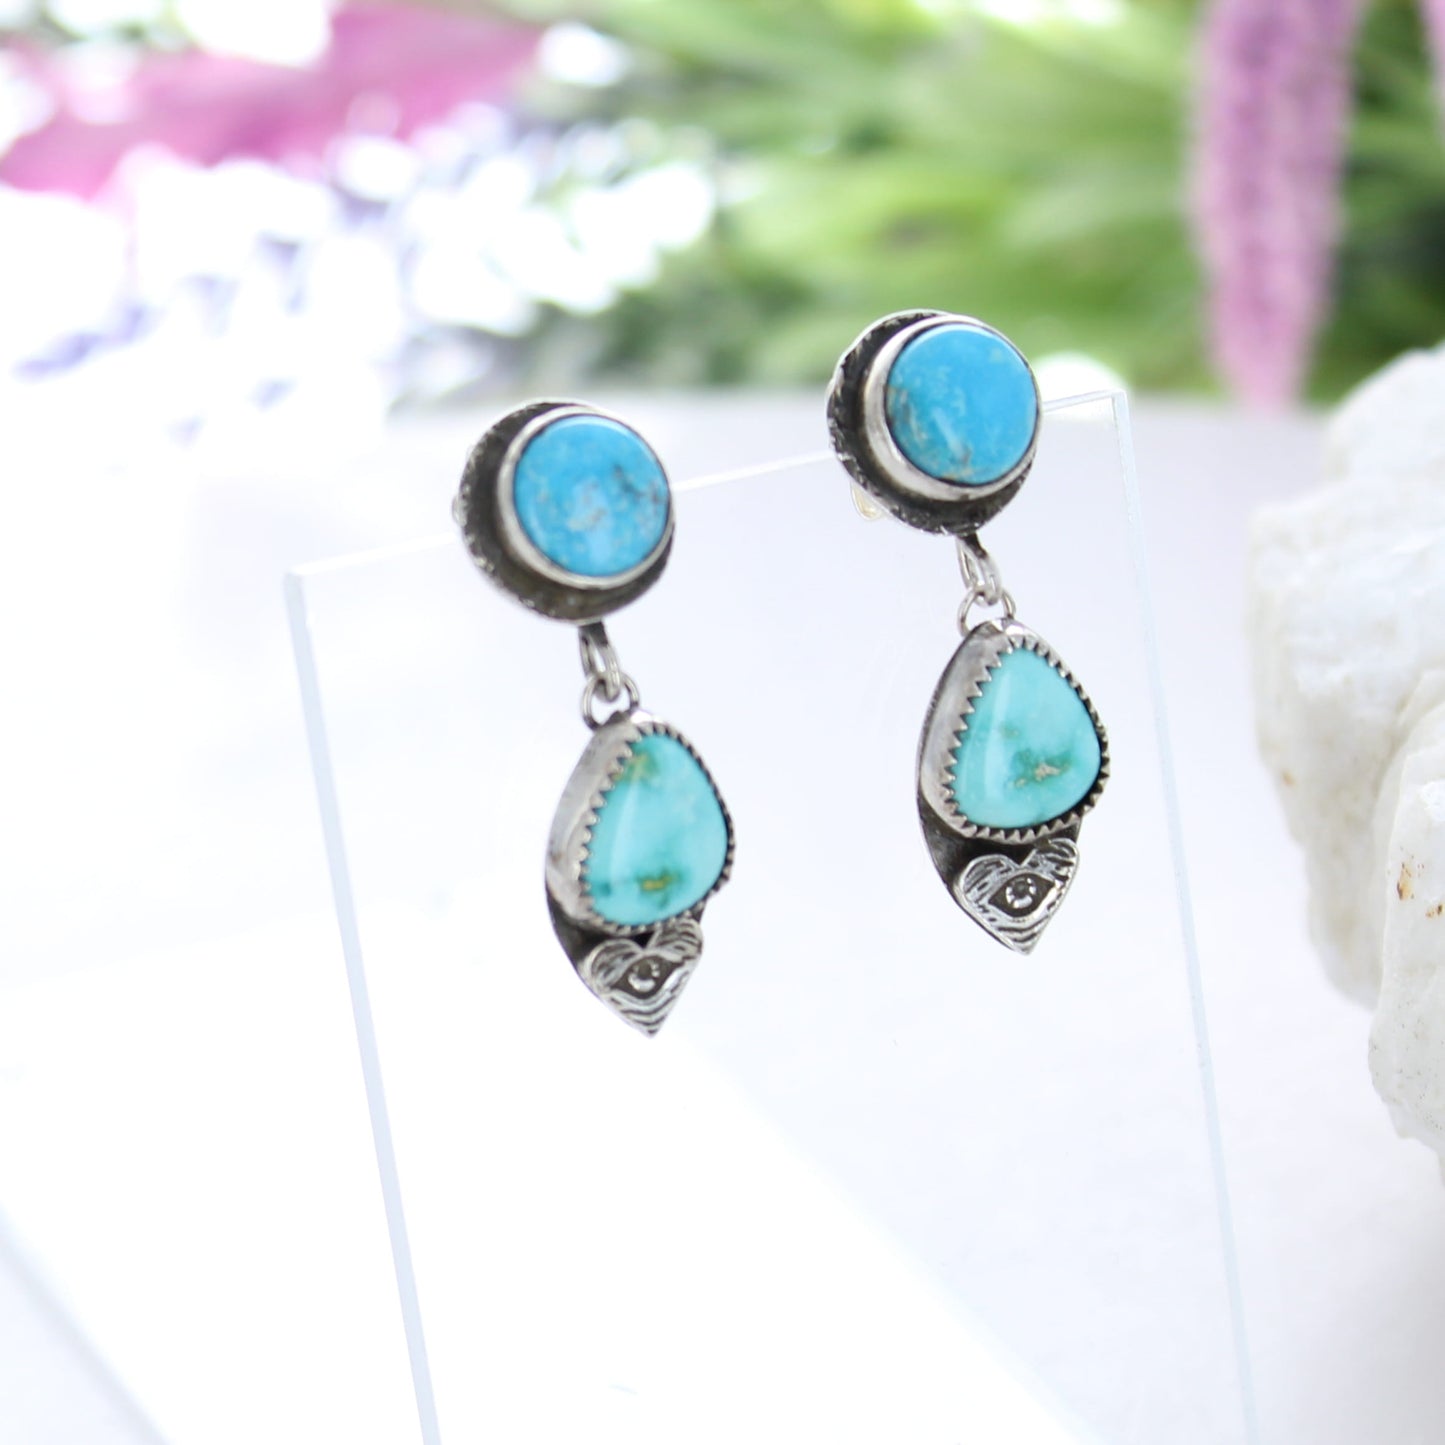 Sonoran Turquoise Earrings Shades of Greens and Blue Sterling Heart Eyes